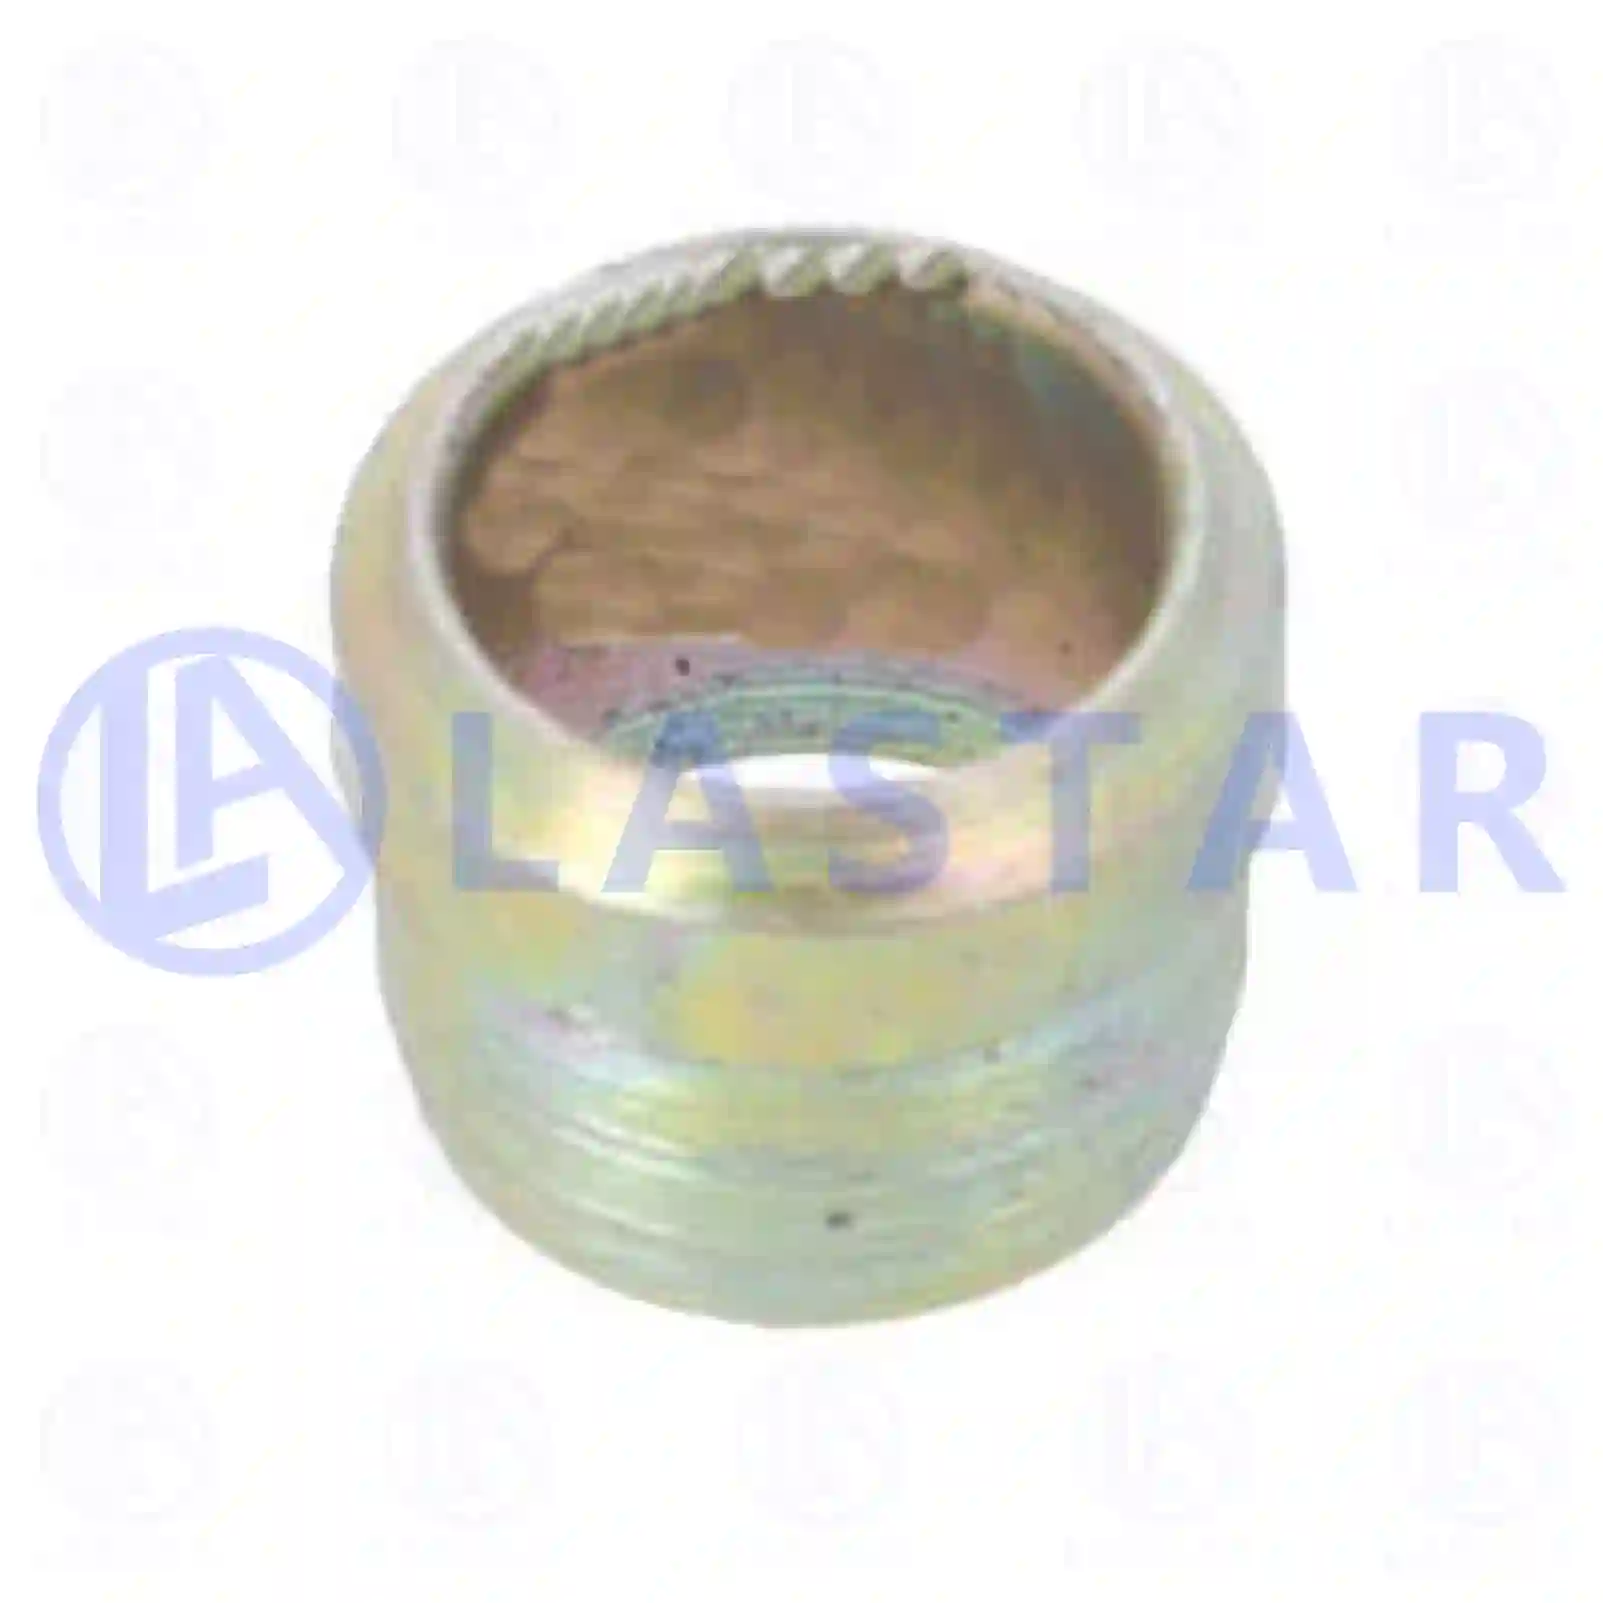  Cutting ring || Lastar Spare Part | Truck Spare Parts, Auotomotive Spare Parts